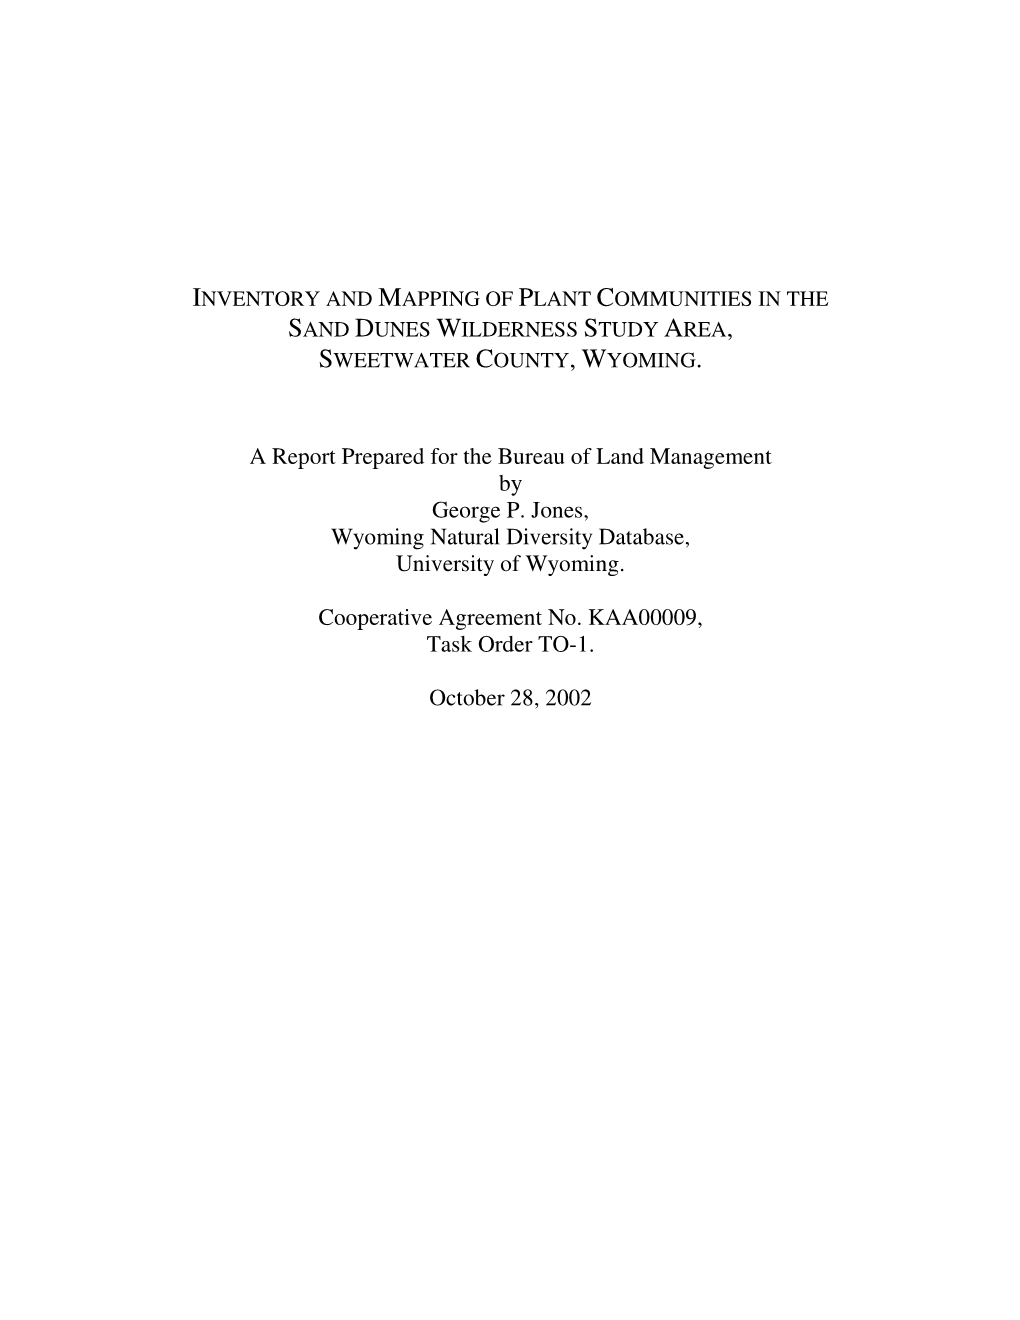 A Report Prepared for the Bureau of Land Management by George P